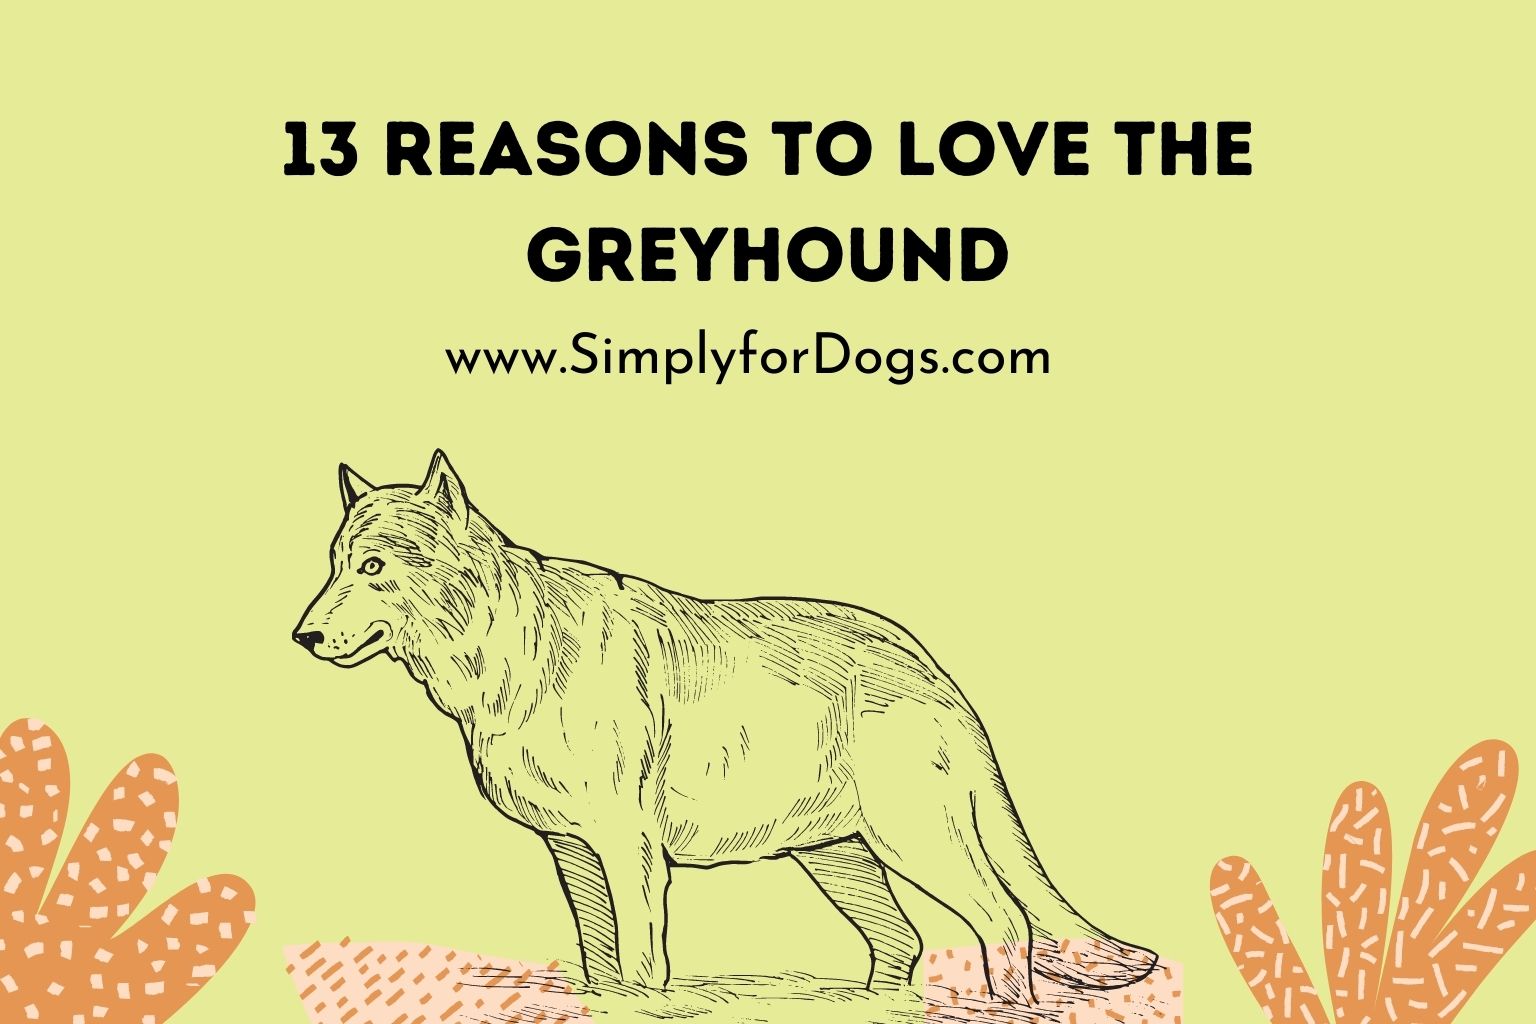 13 Reasons to Love the Greyhound